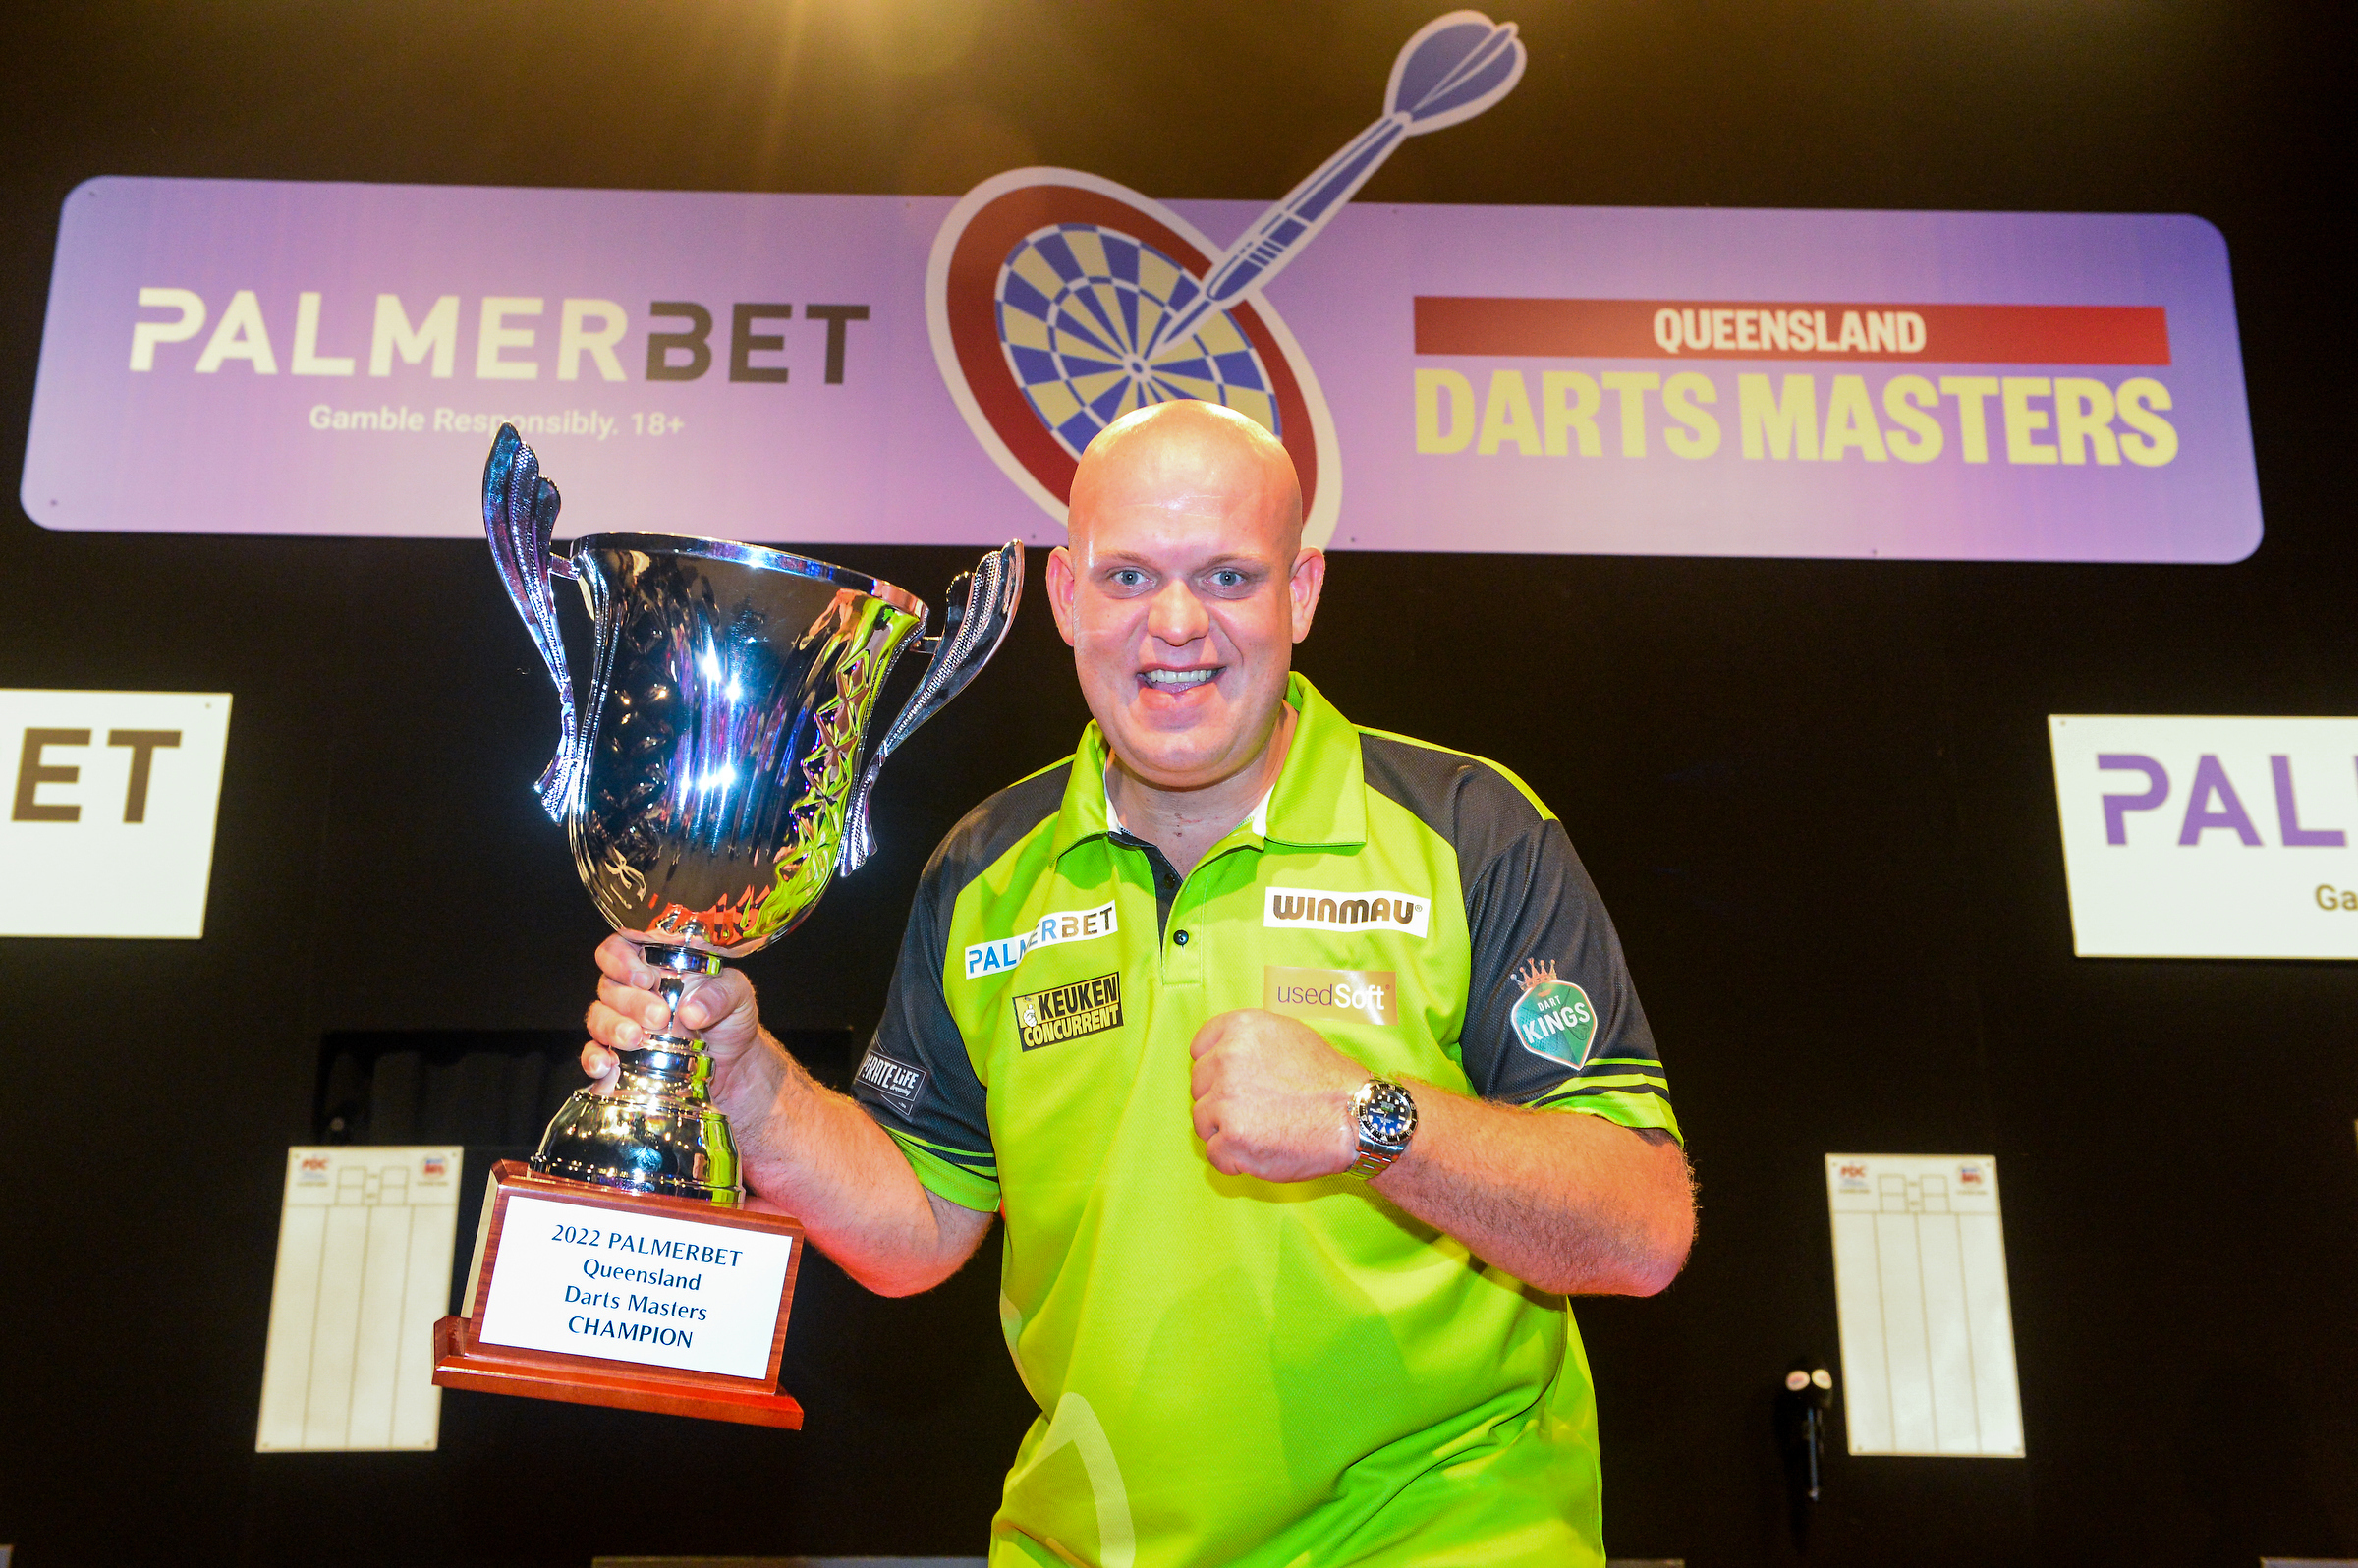 Queensland Darts Masters 2022 Draw, schedule, results, odds and TV coverage details